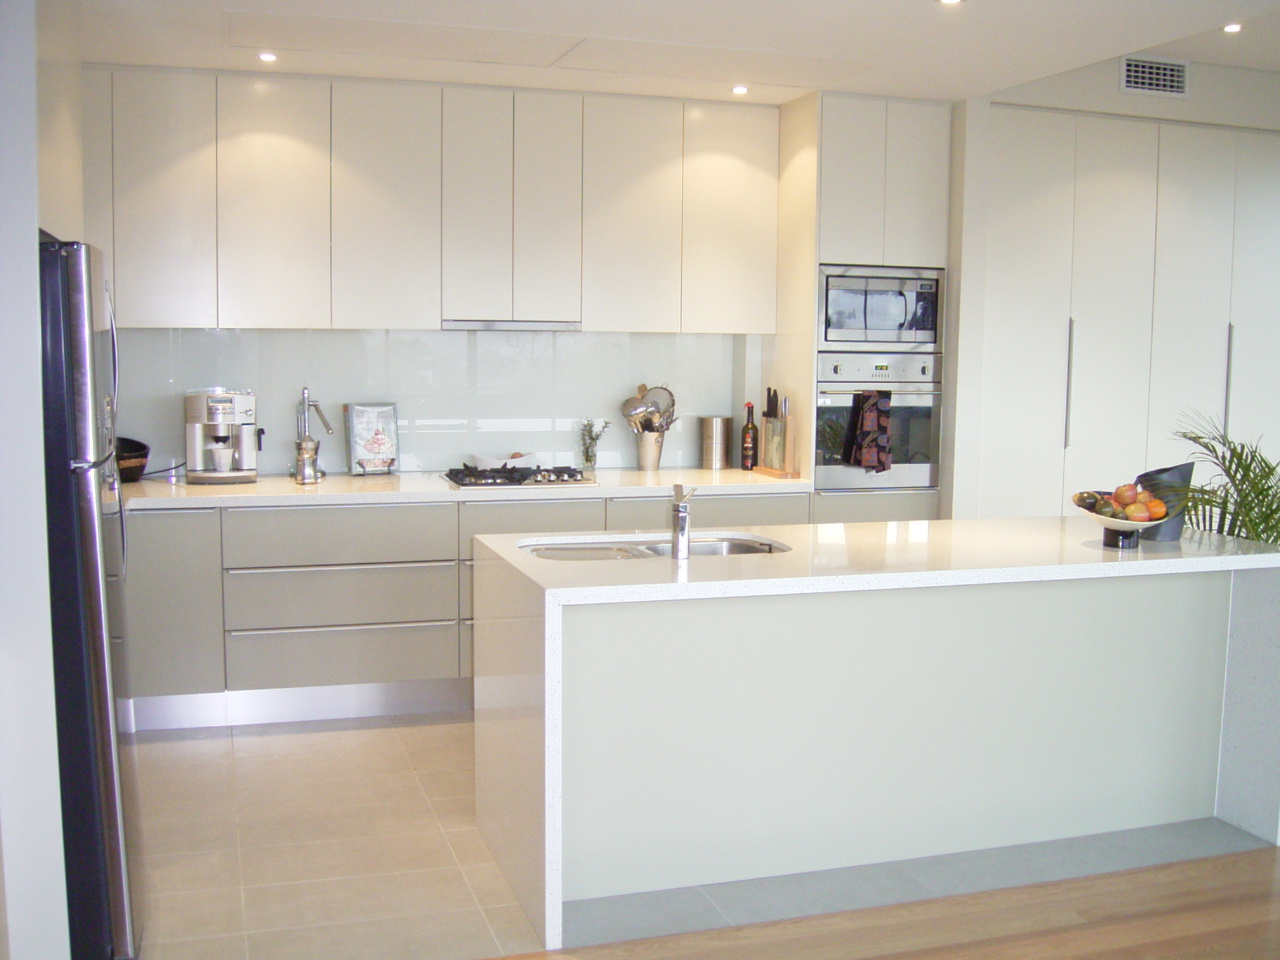 4 Reasons Why You Should Consider A Flat Pack Kitchen The Interiors Addict